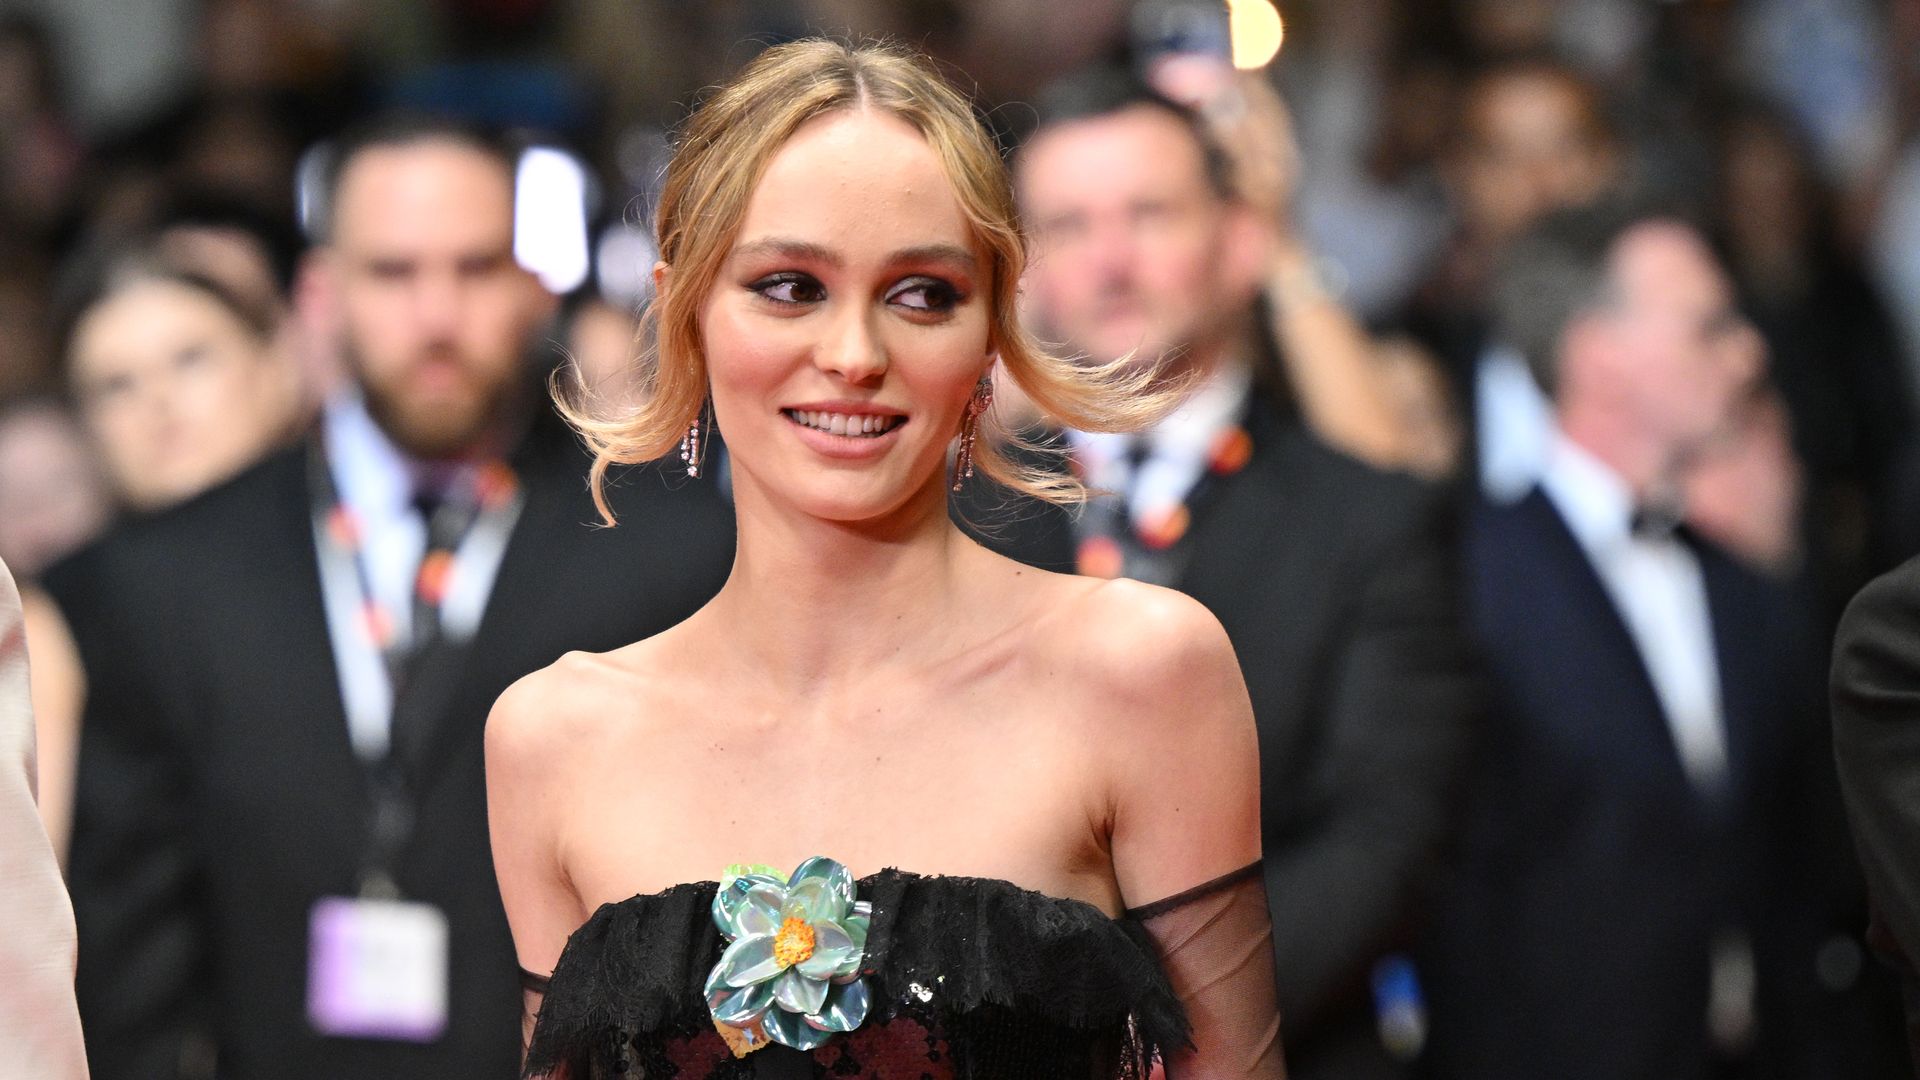 Lily-Rose Depp copied two supermodels for her Cannes red carpet outfit